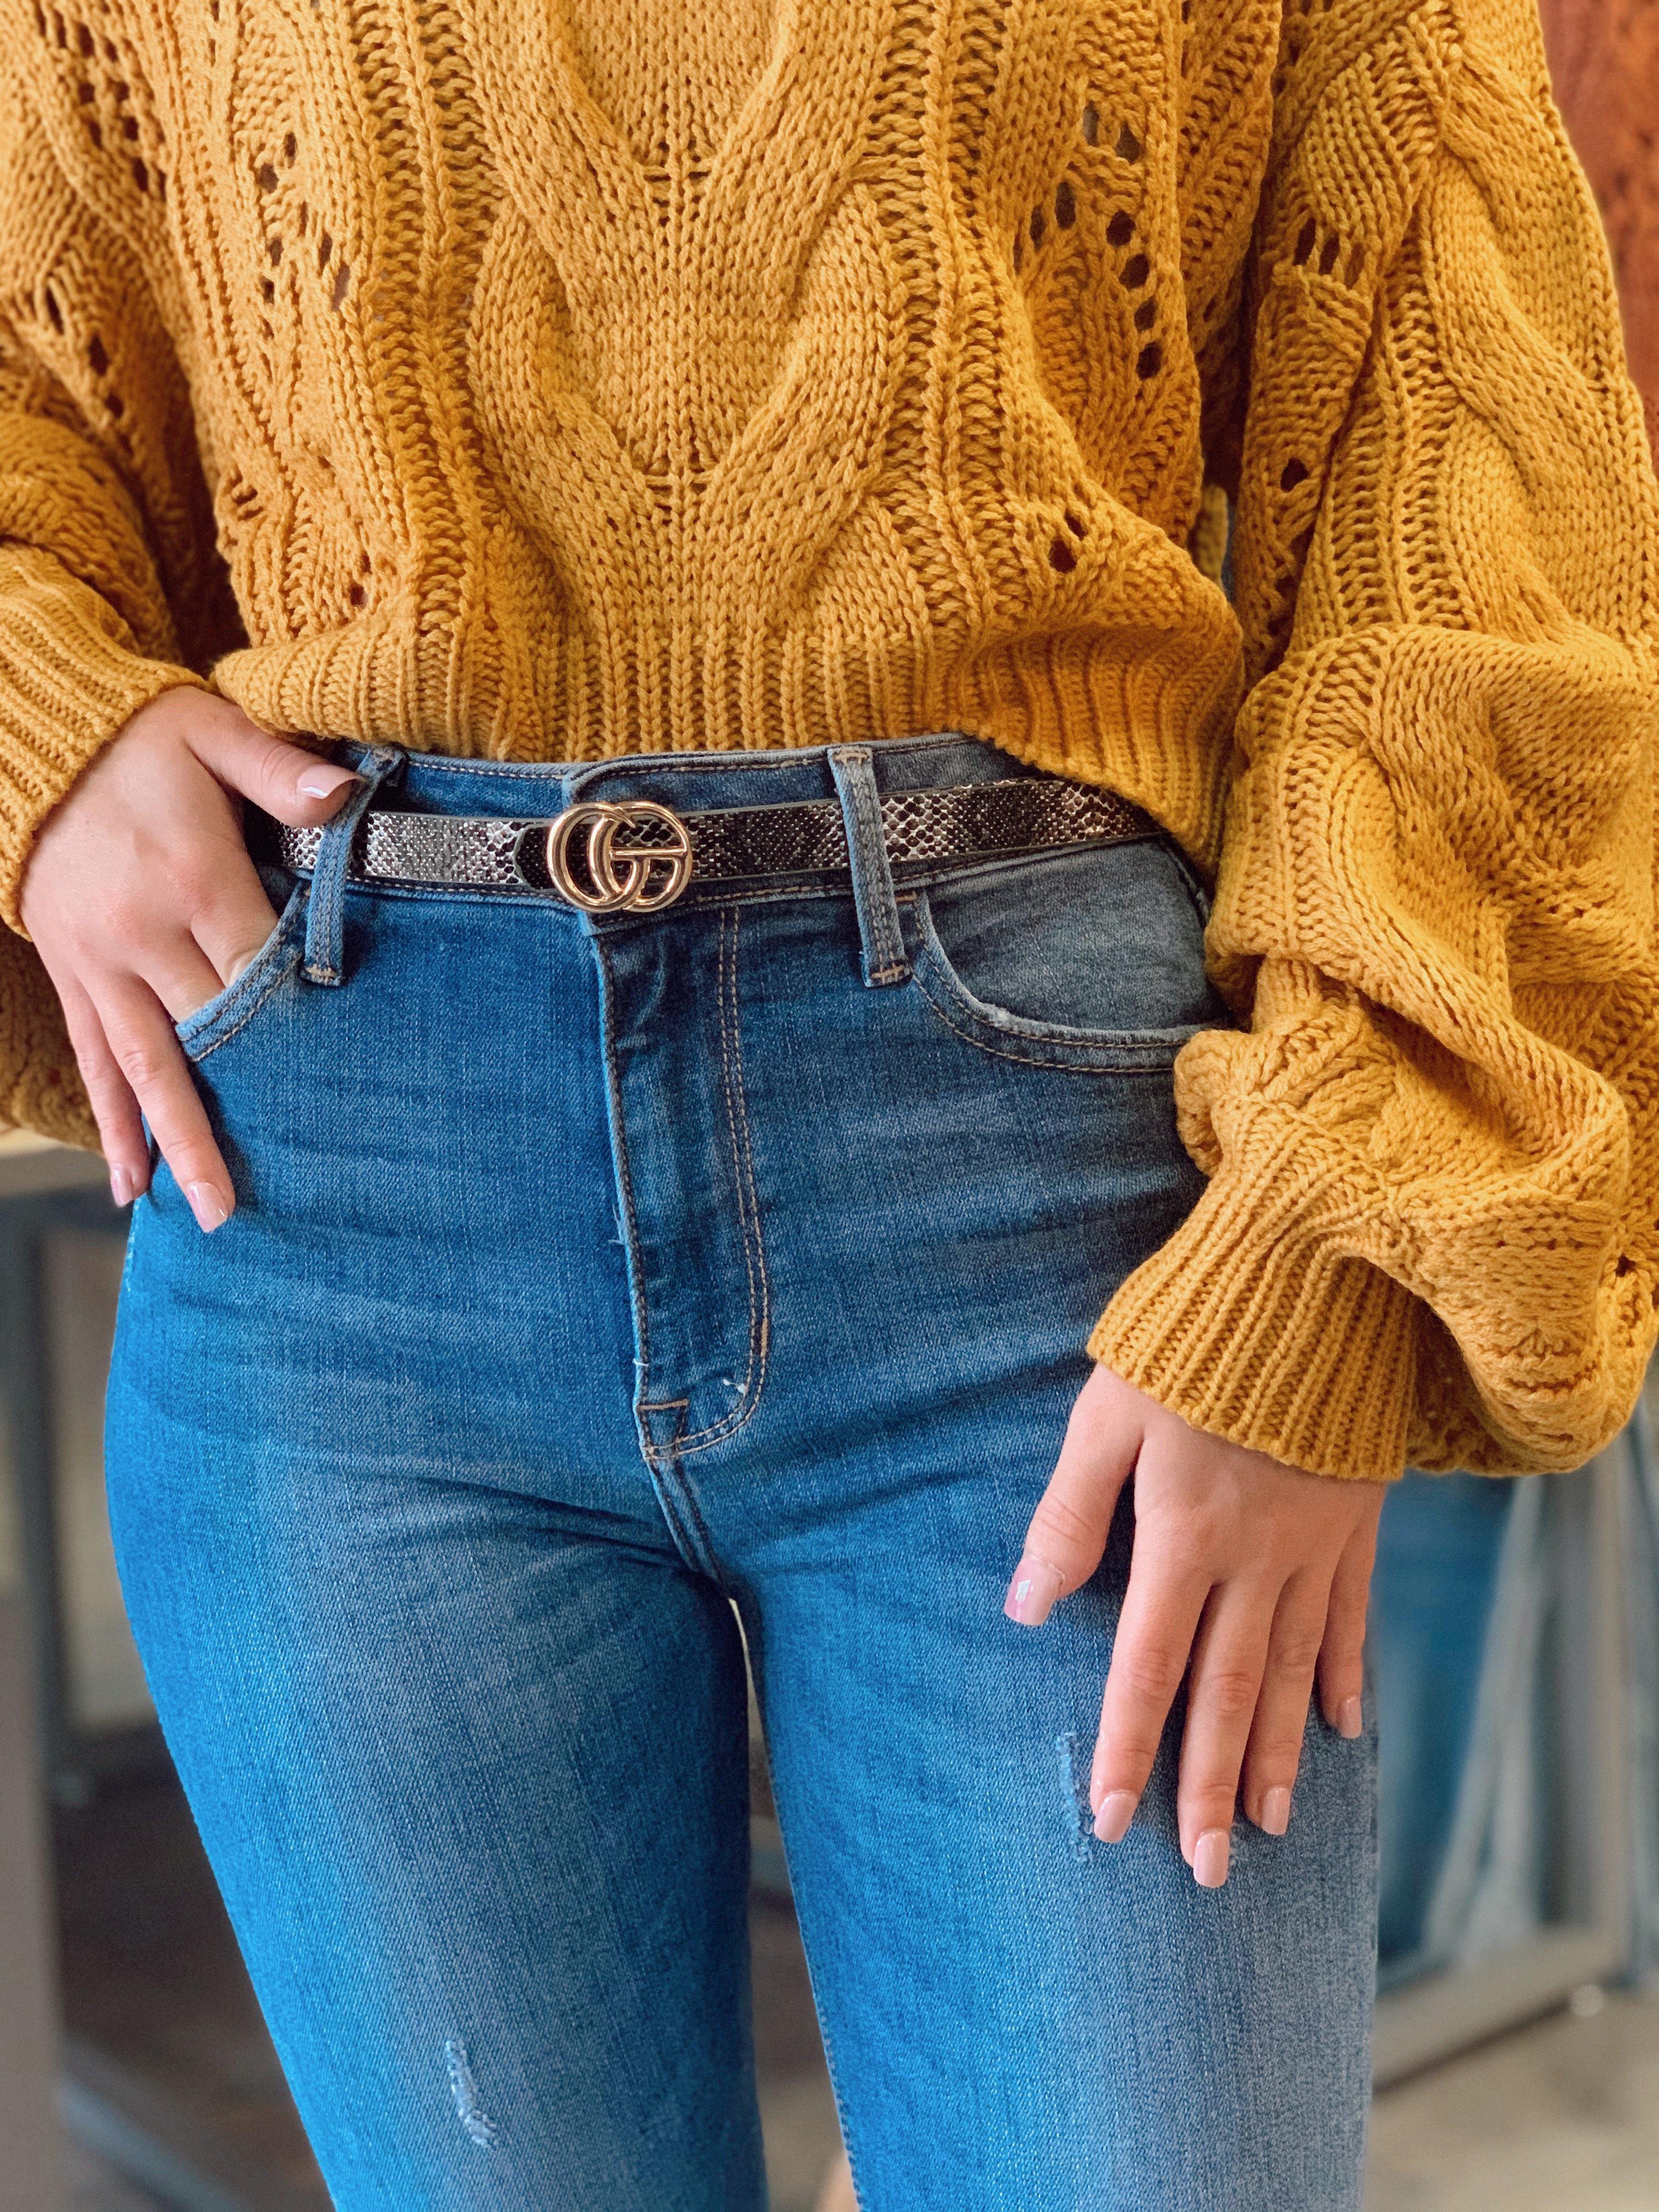 5 Tips on How to Wear and Style a Belt – Current Boutique